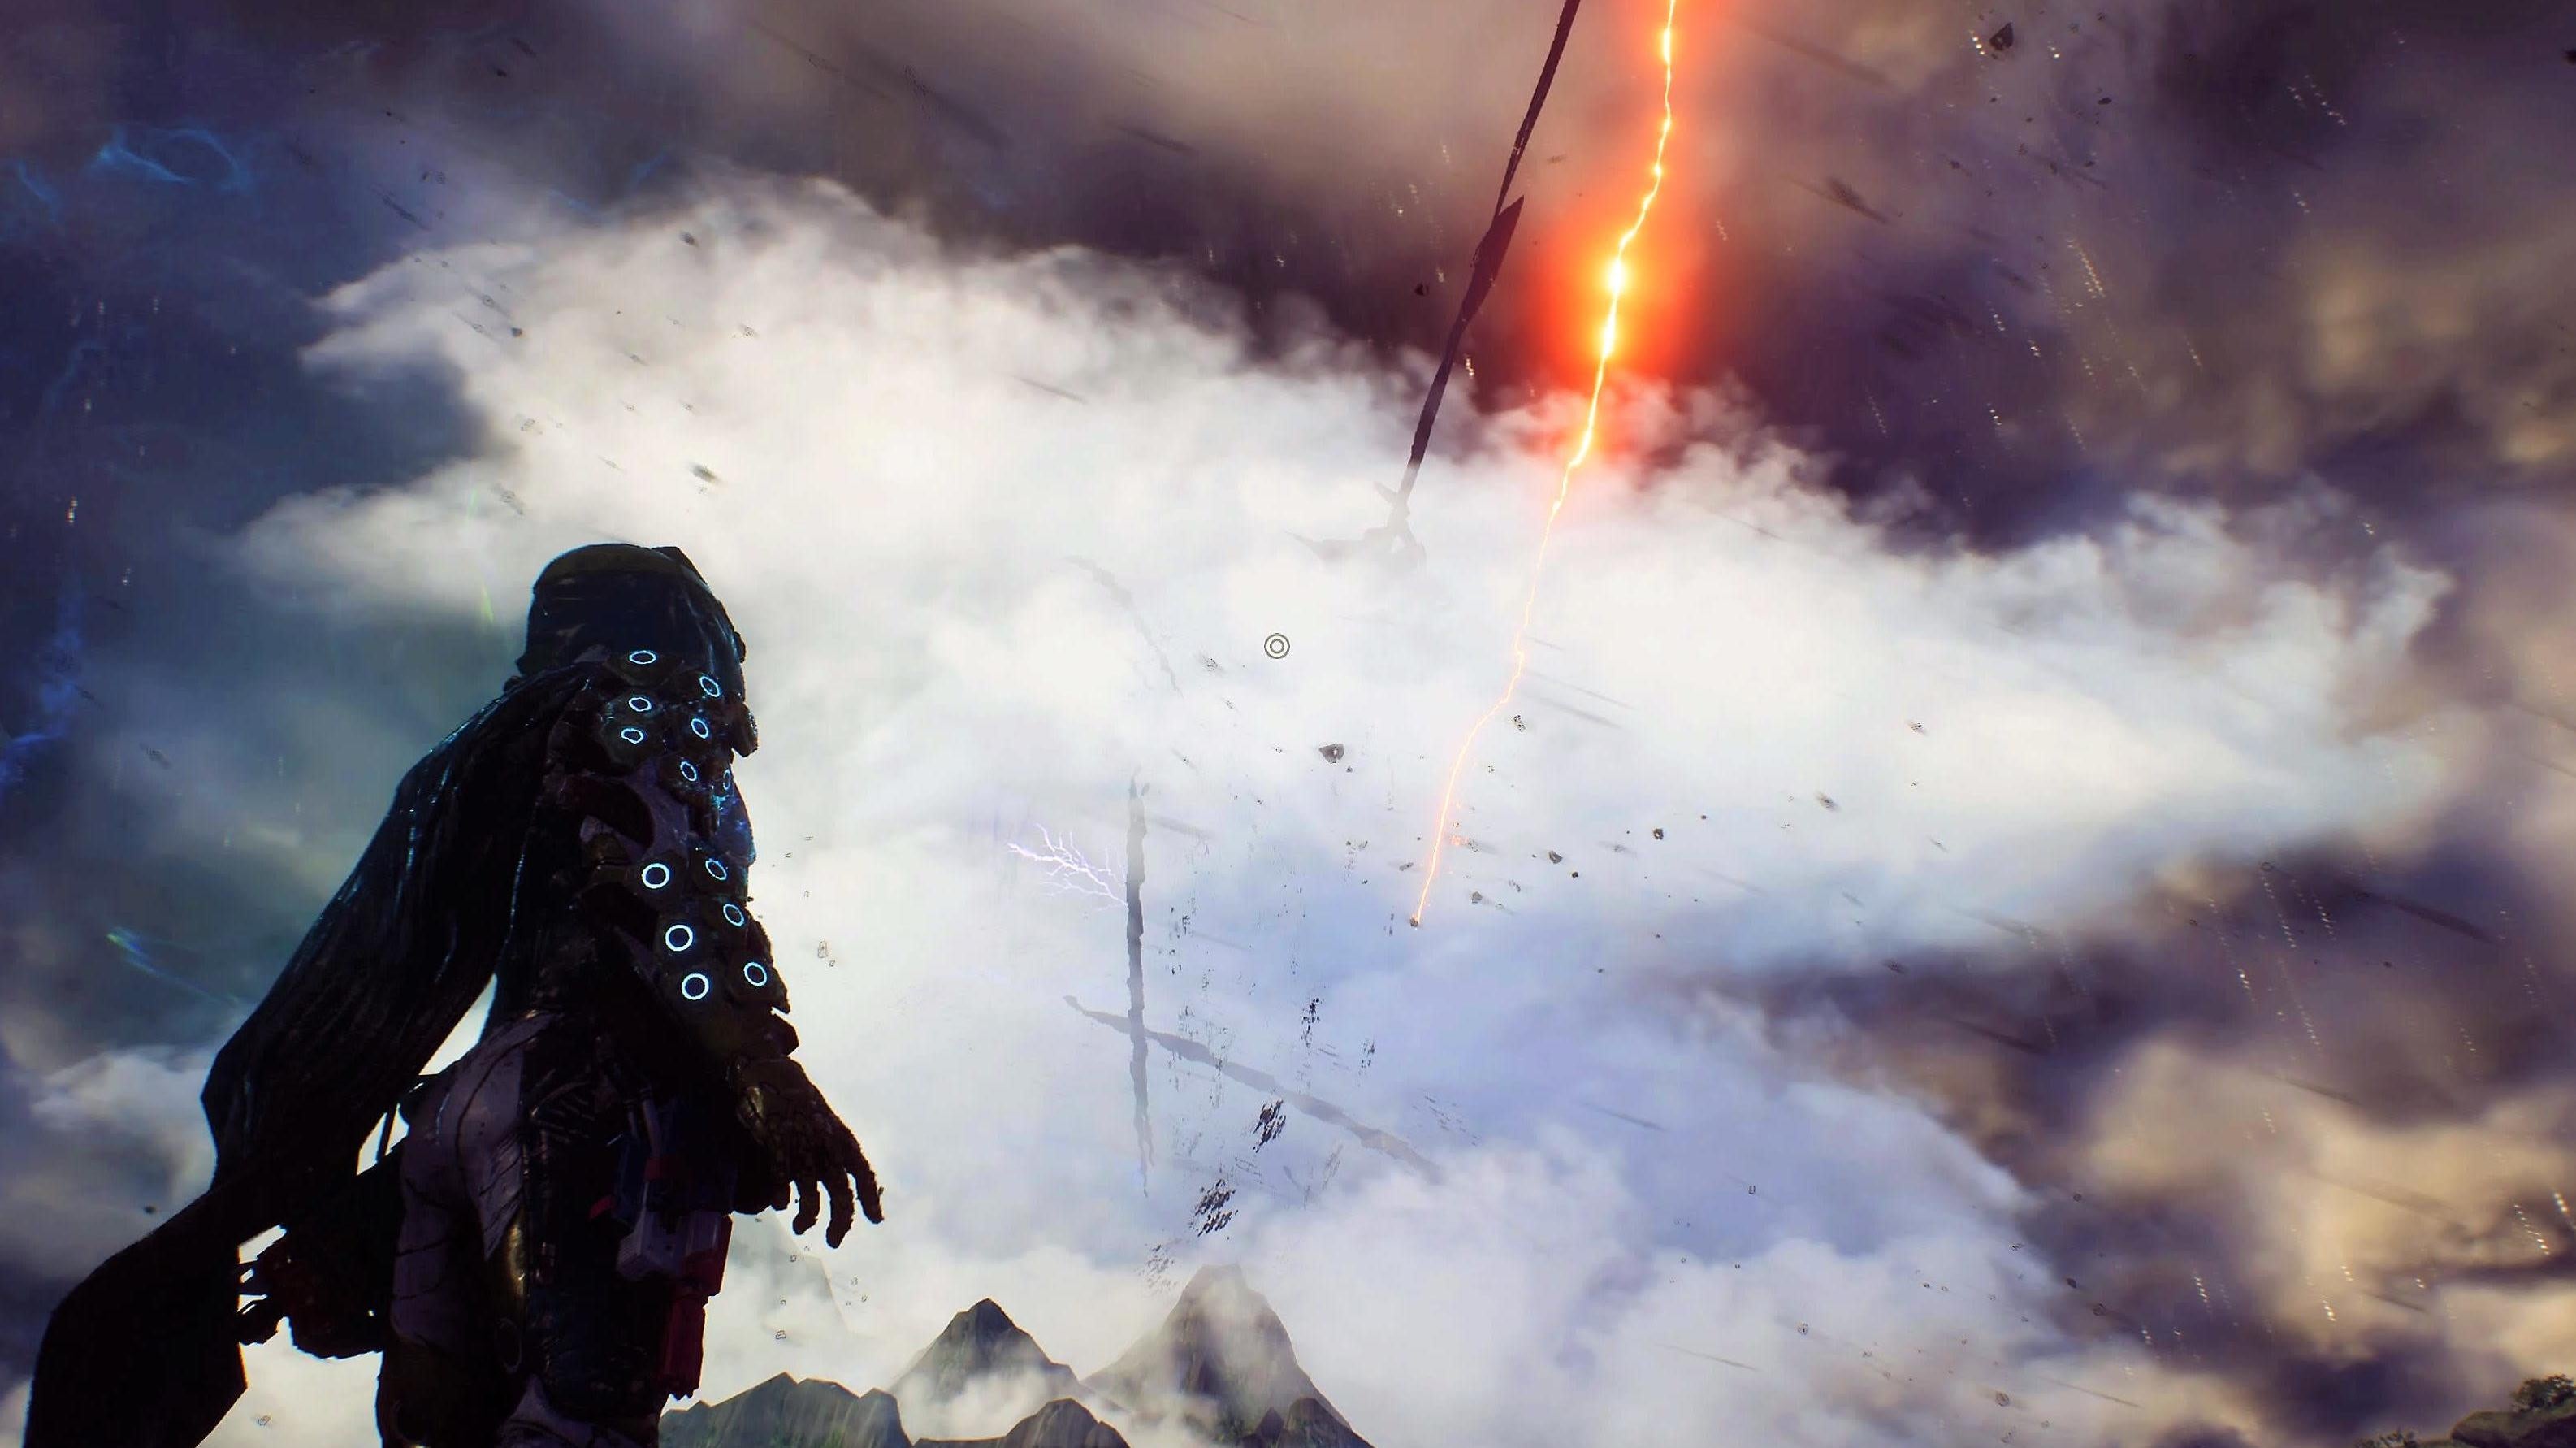 A Mysterious Storm Is Brewing On Anthem's Horizon After Weeks Of Nothing